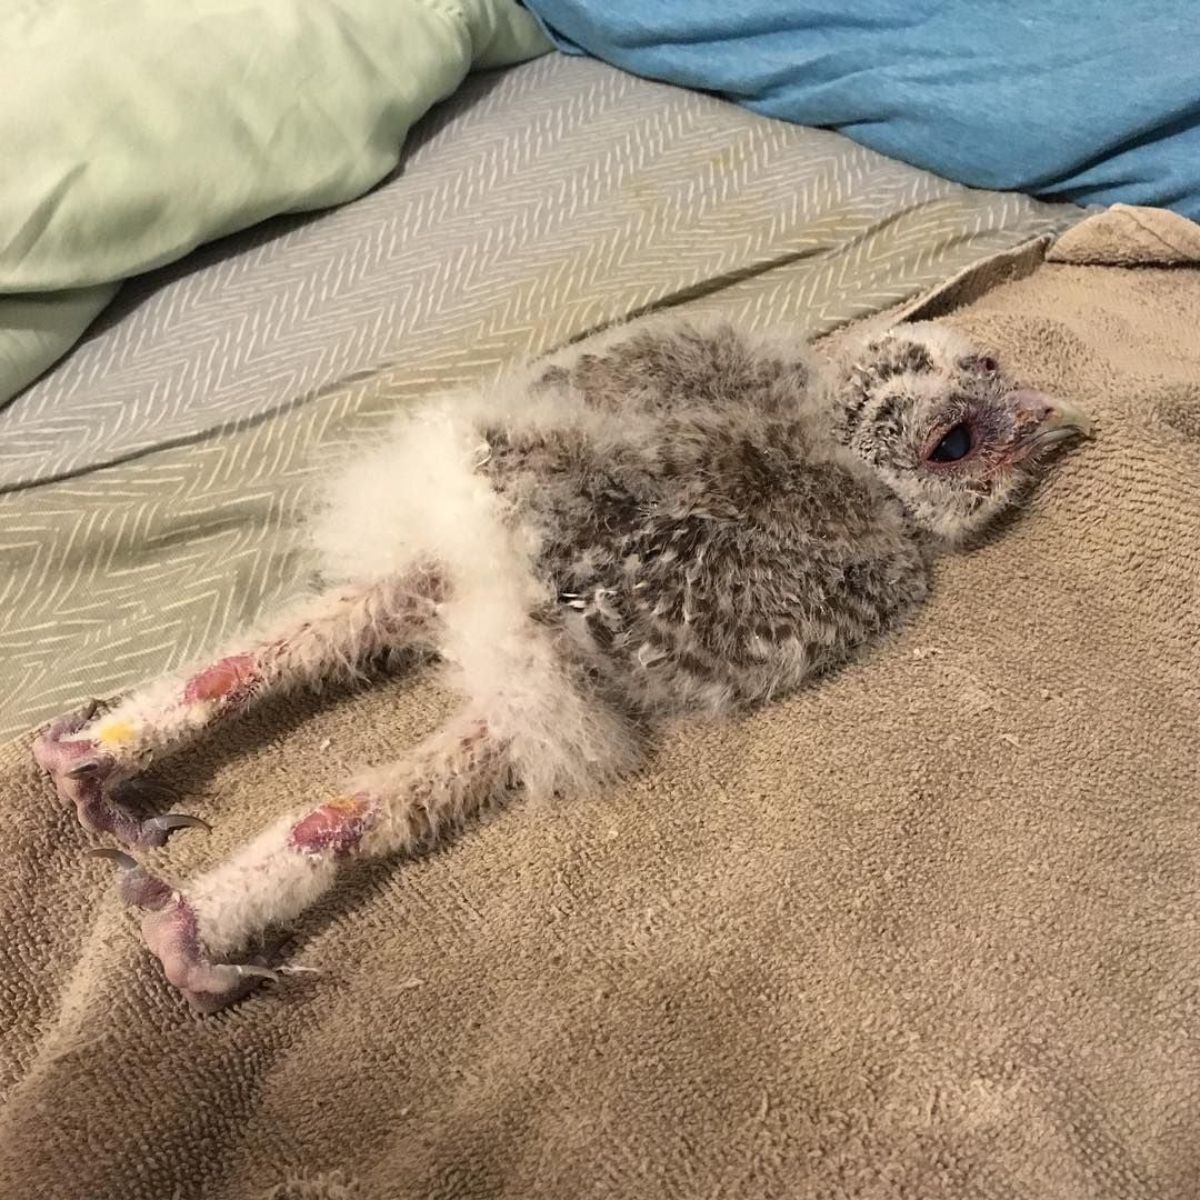 A young owl sleeping on a bed.